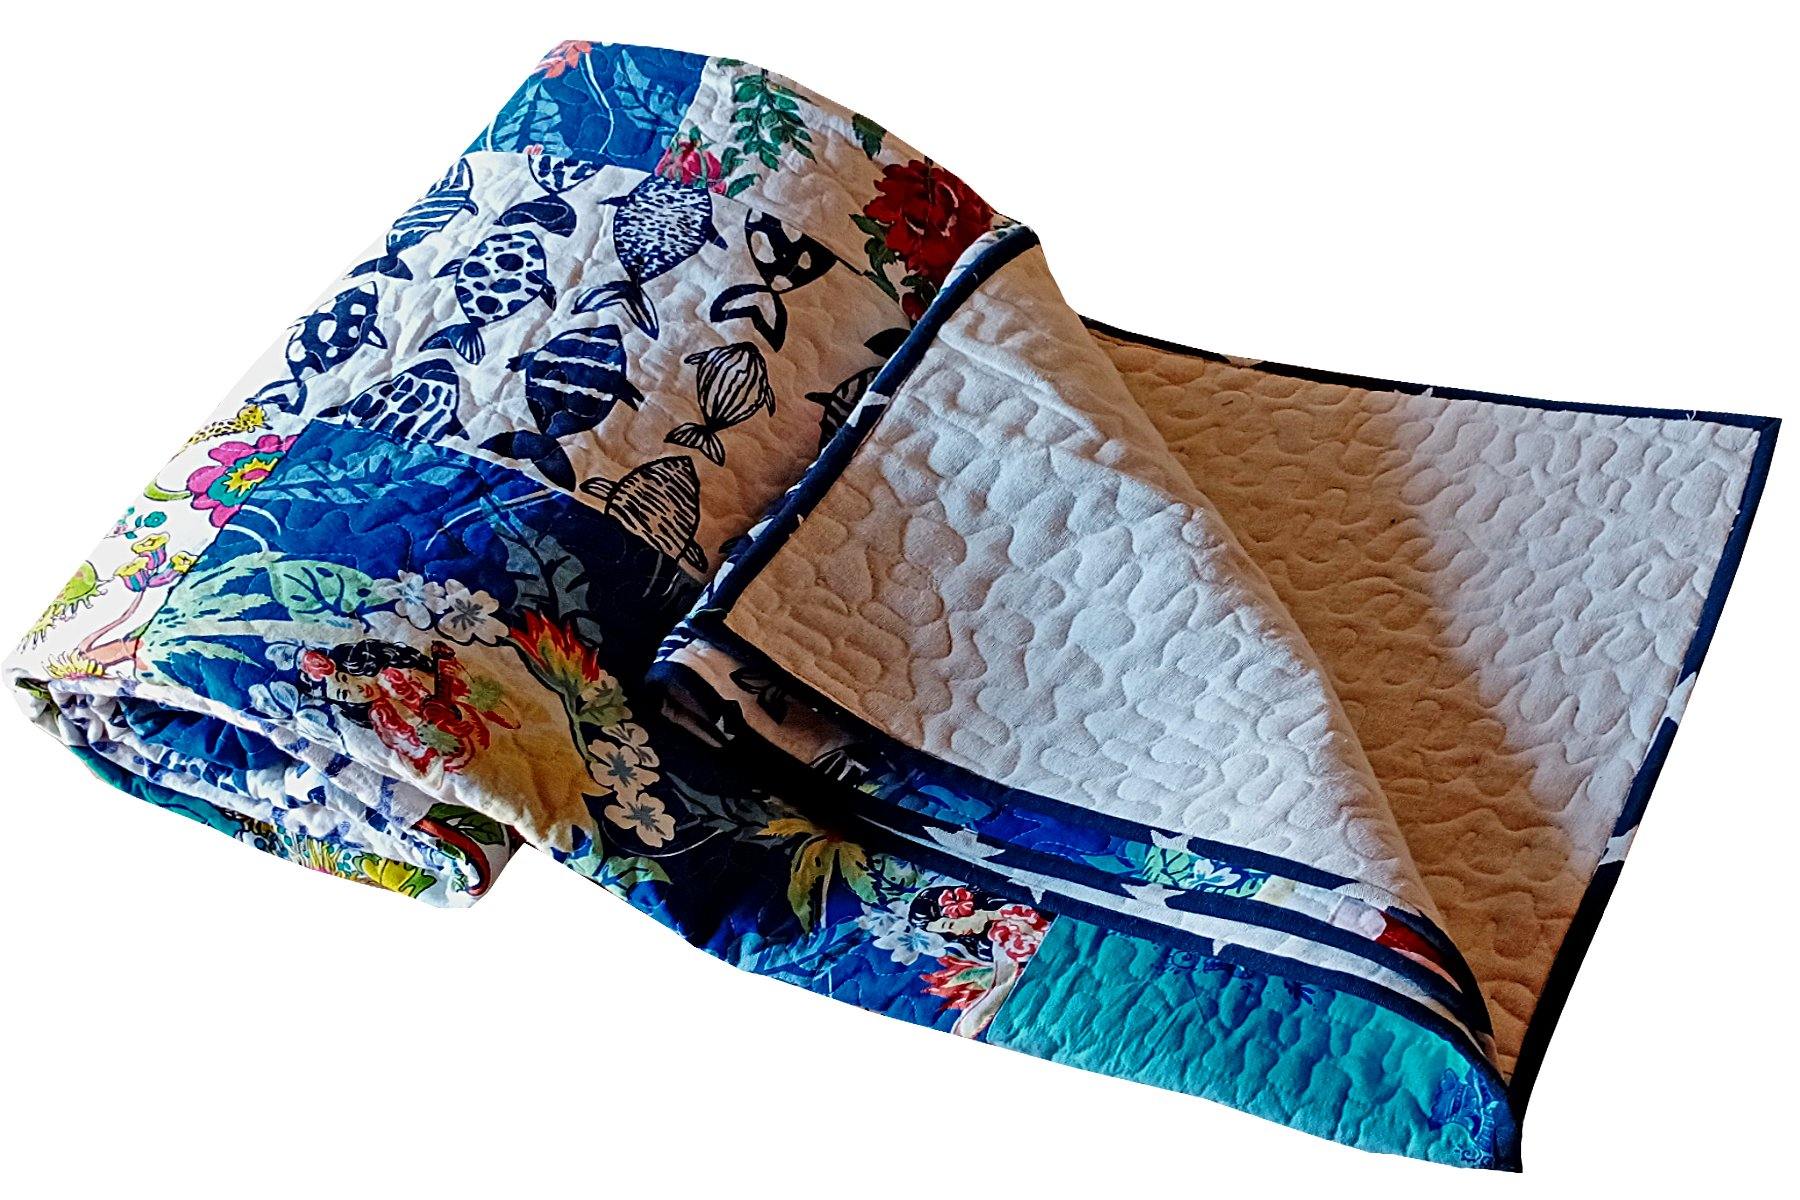 Aquatic Patchwork Machine Quilted Bedcover King Size - The Teal Thread